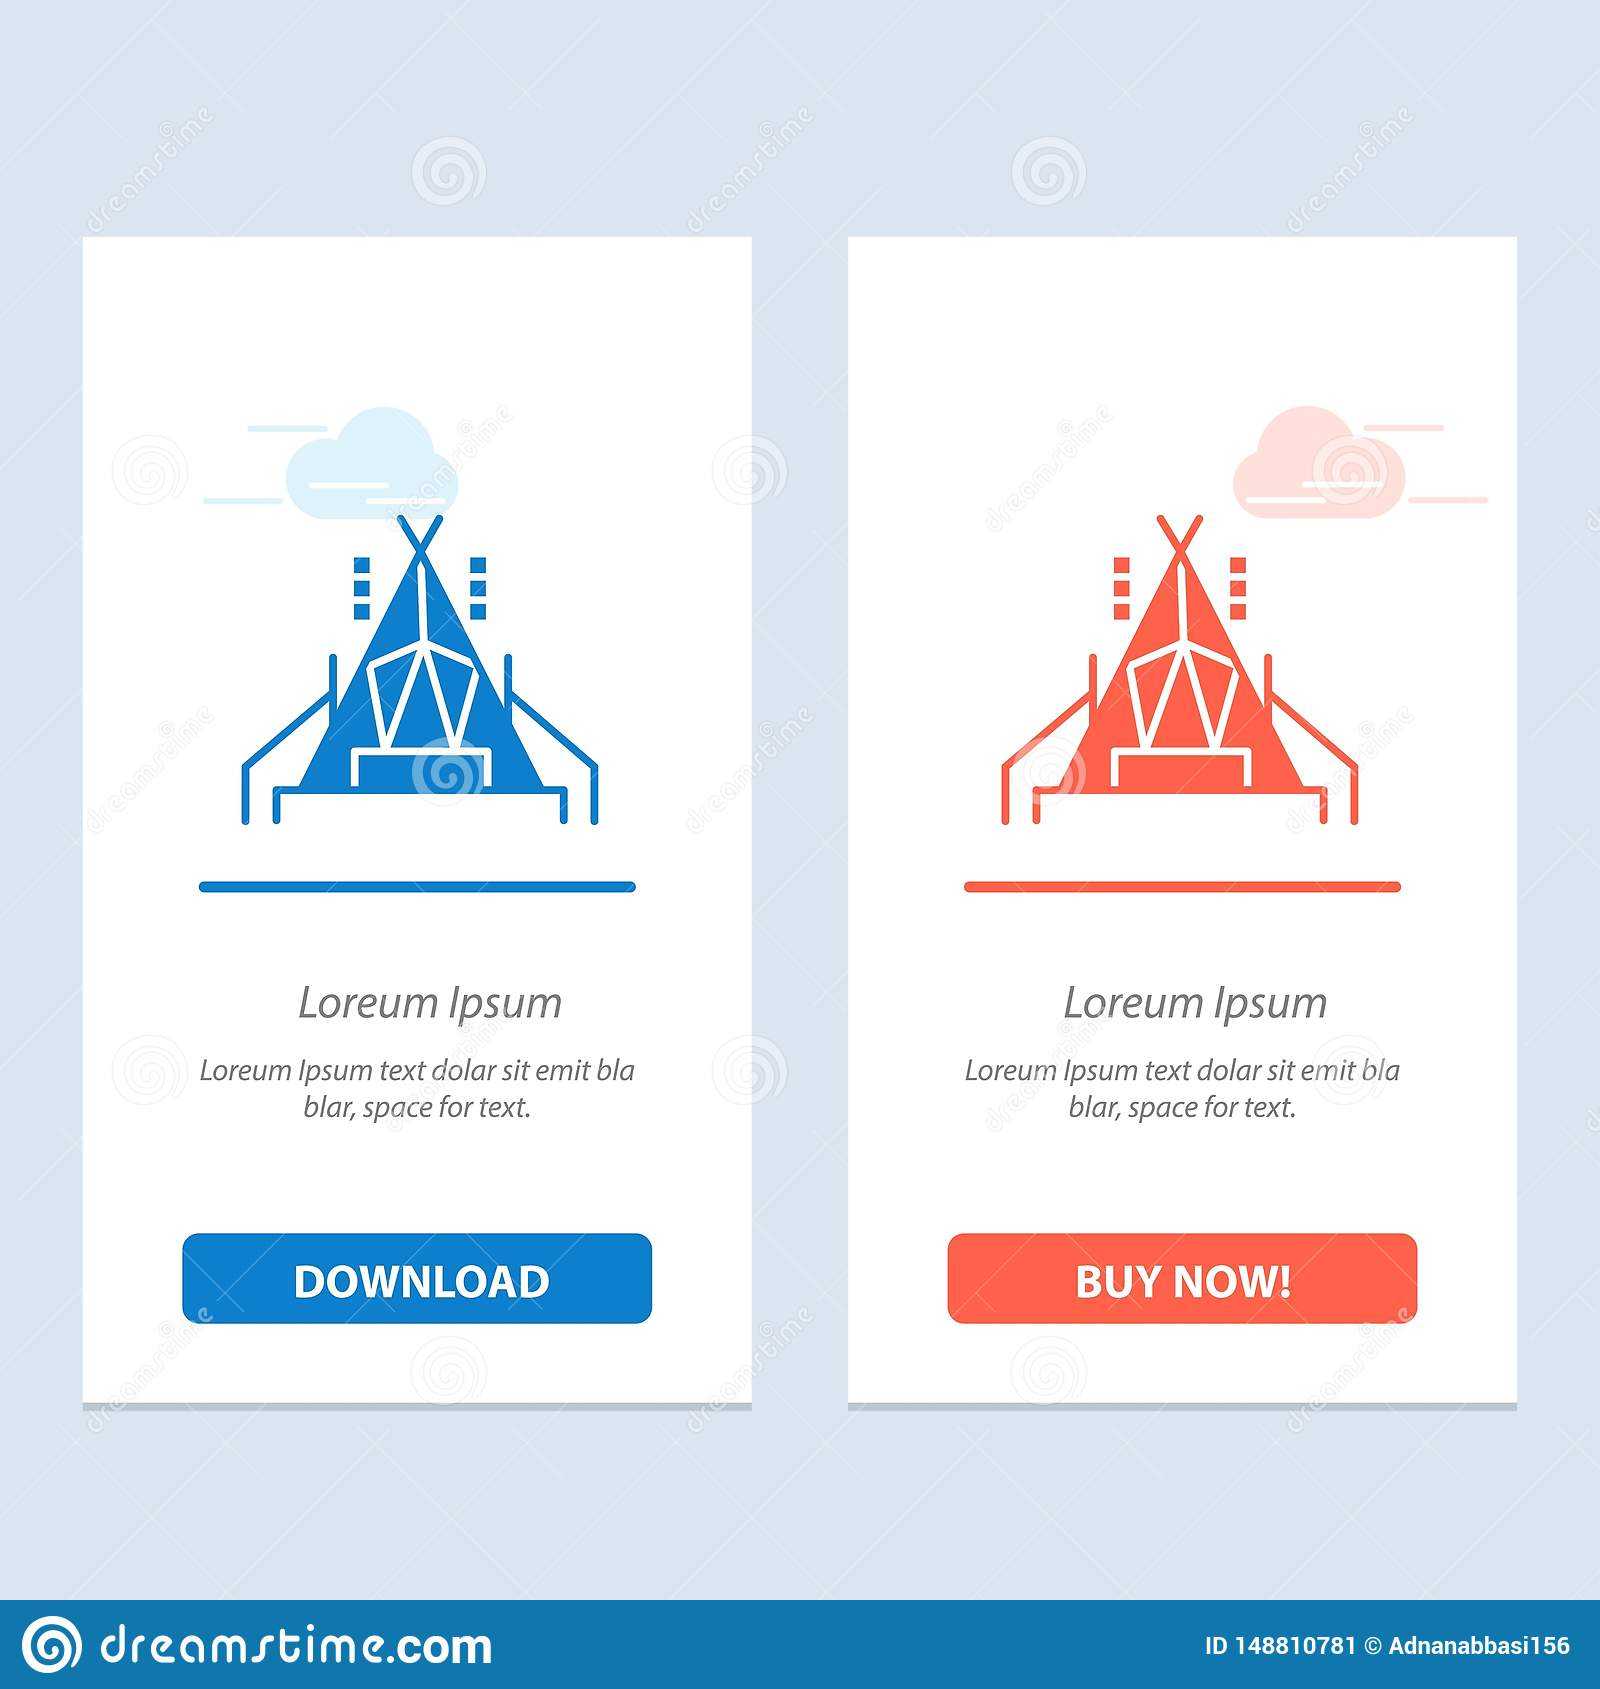 Camp, Tent, Camping Blue And Red Download And Buy Now Web Intended For Free Tent Card Template Downloads